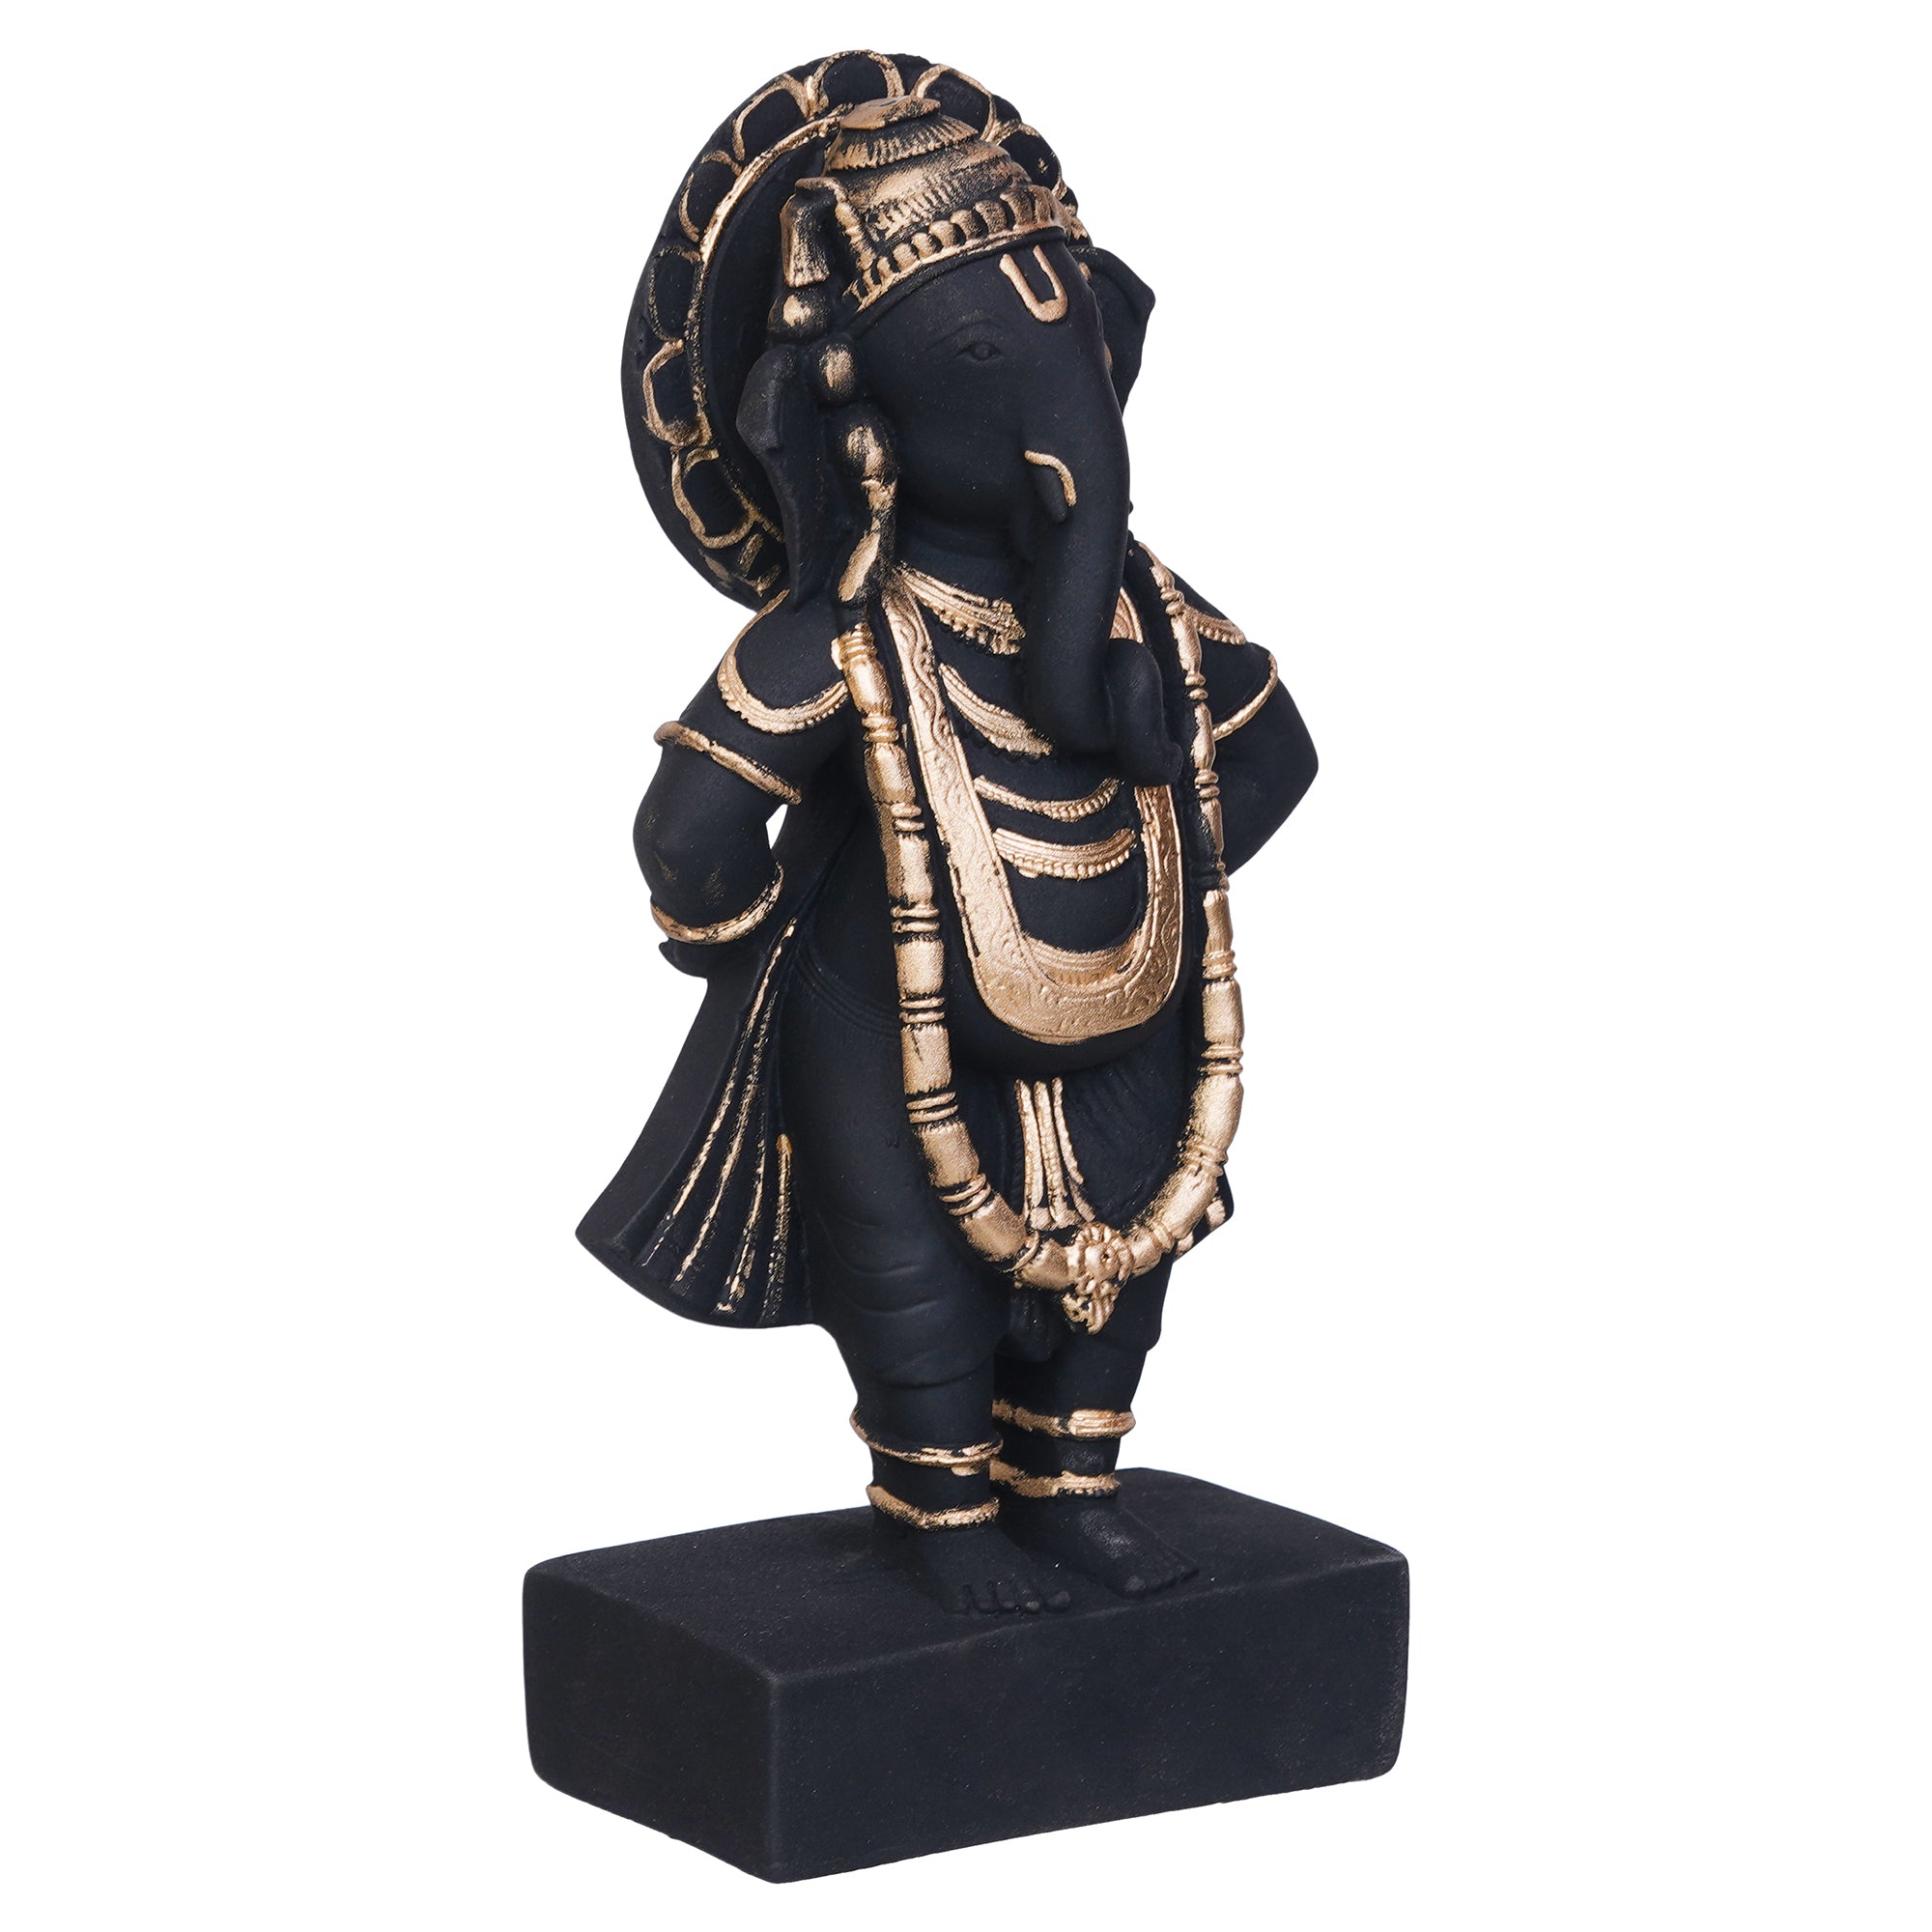 Black & Golden Polyresin Handcrafted Standing Lord Ganesha Statue 6